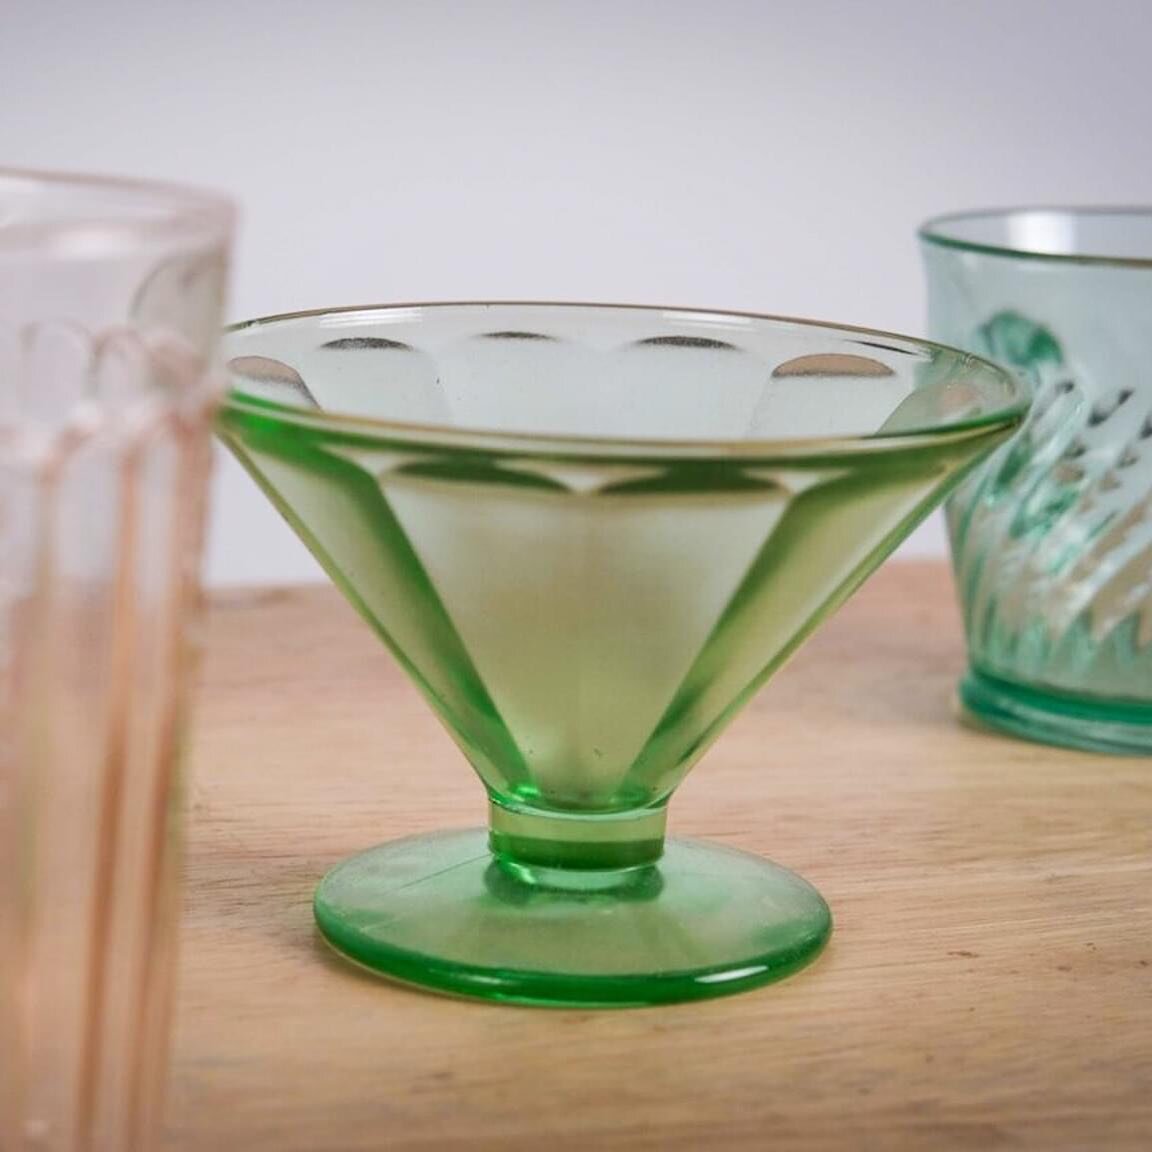 ⛏ From the Archives ⛏

Depression Glass is a term used to denote glassware that was produced between 1929-1939. This glassware was either clear or coloured translucent to make it more attractive. It was distributed free or at low cost to the purchase